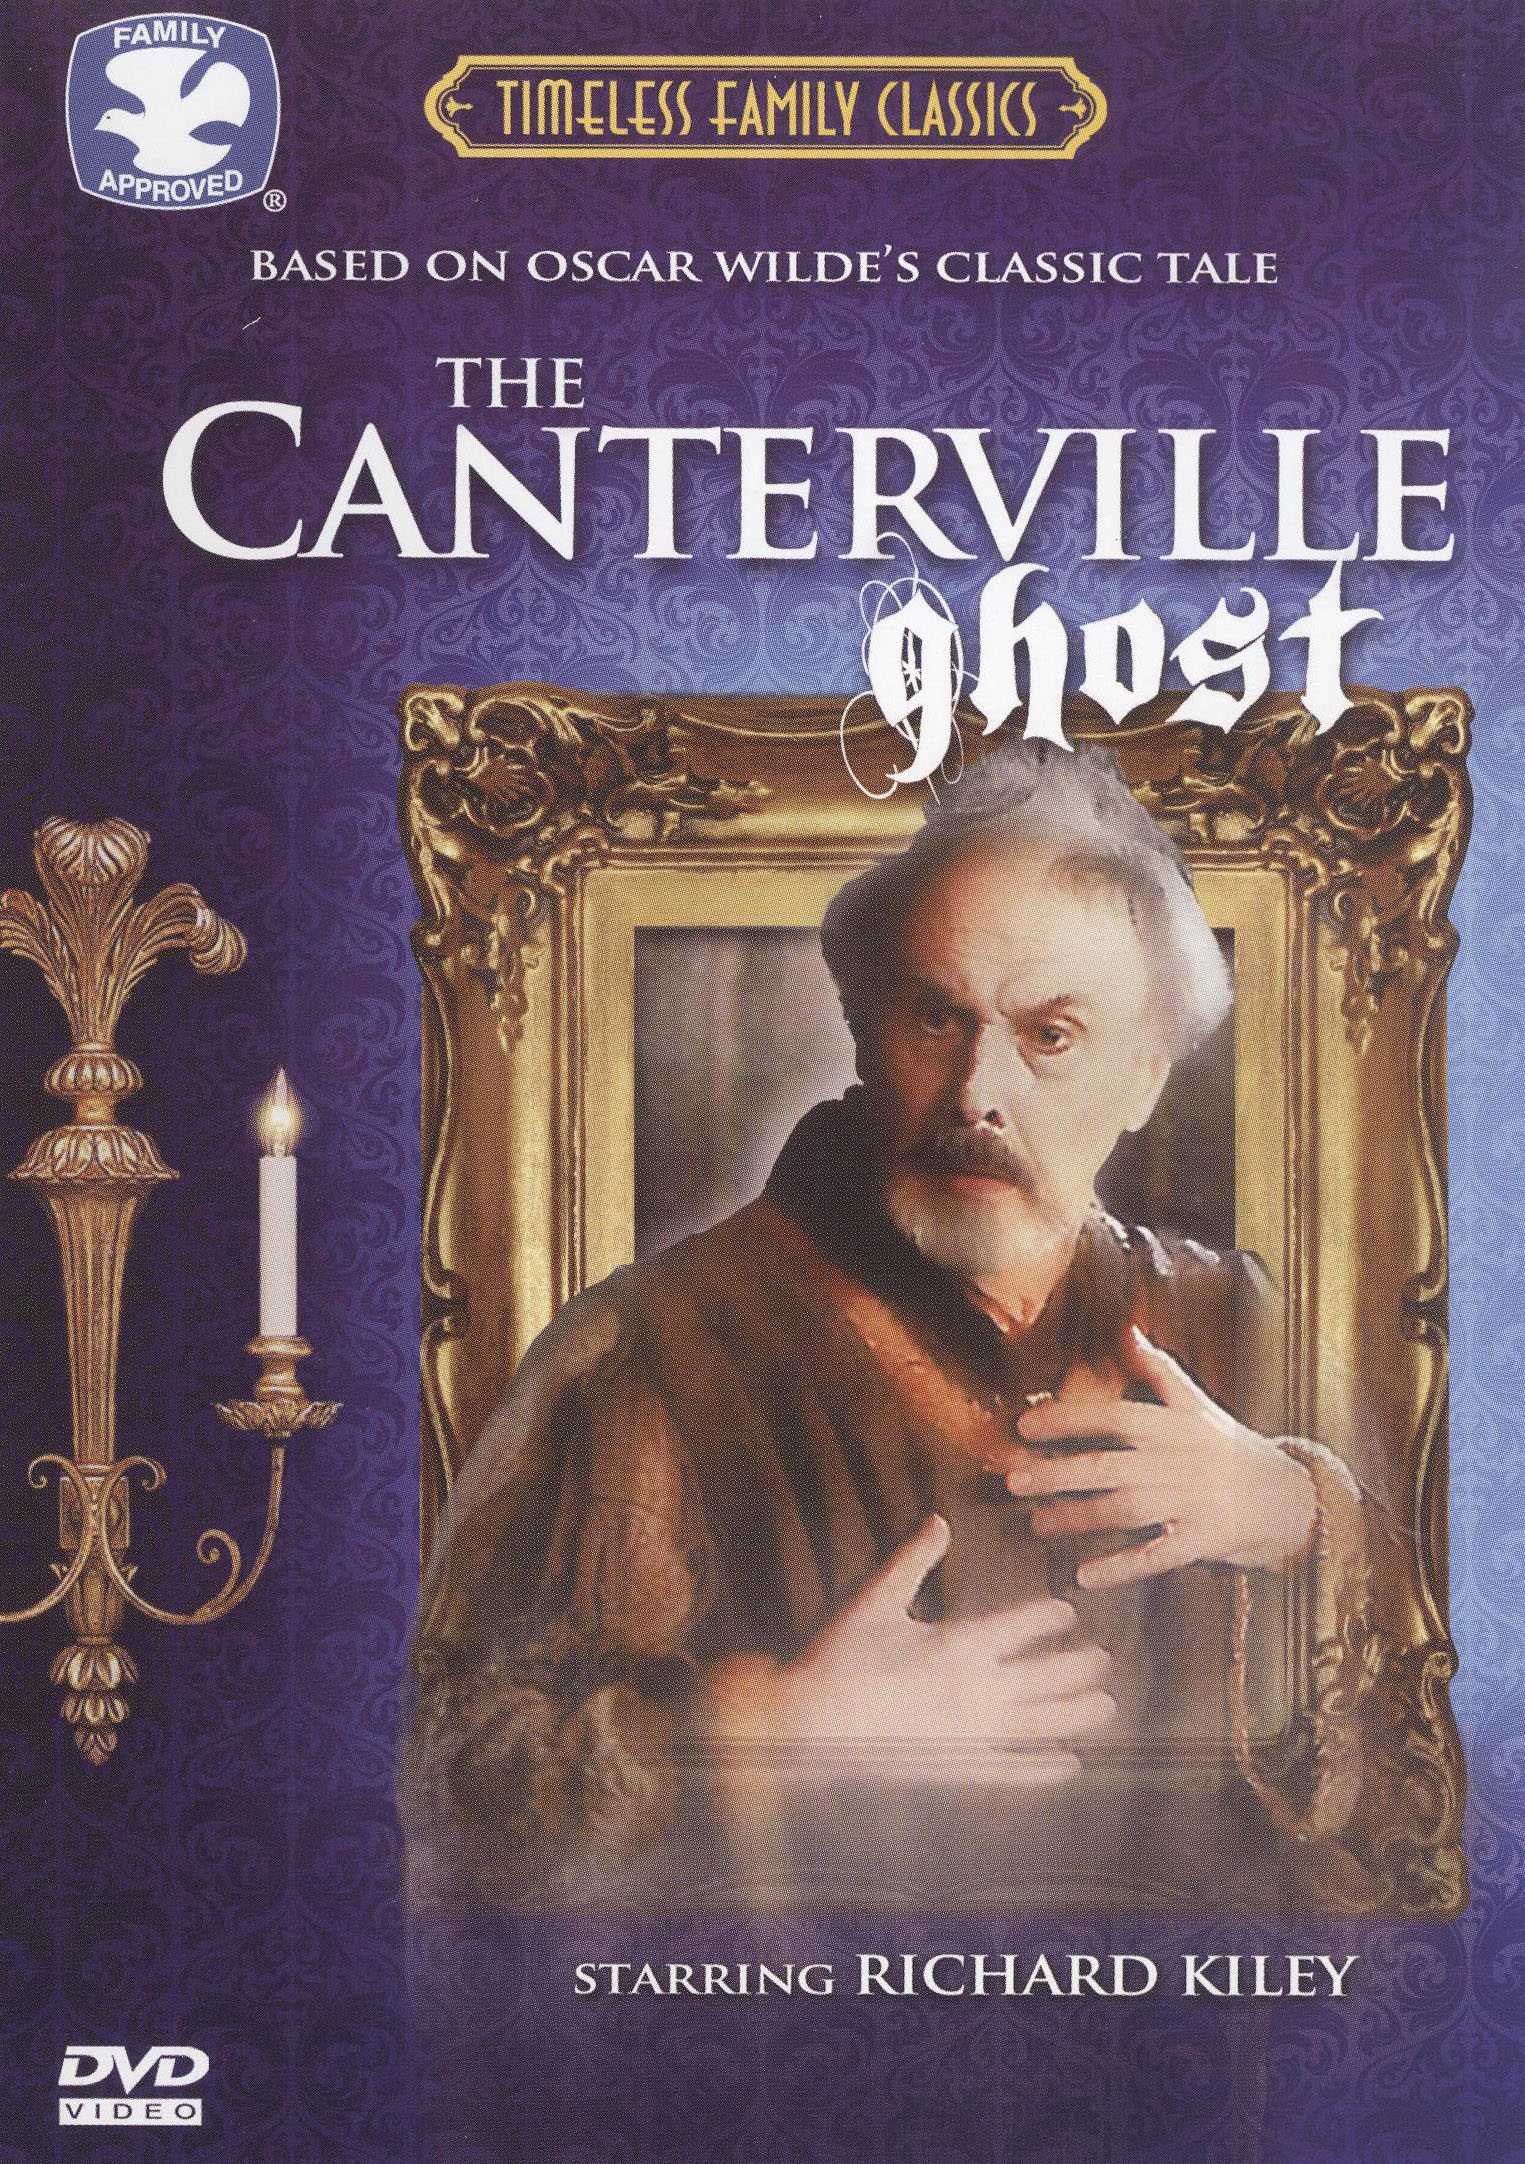 The Canterville Ghost (1991) - William F. Claxton | Synopsis